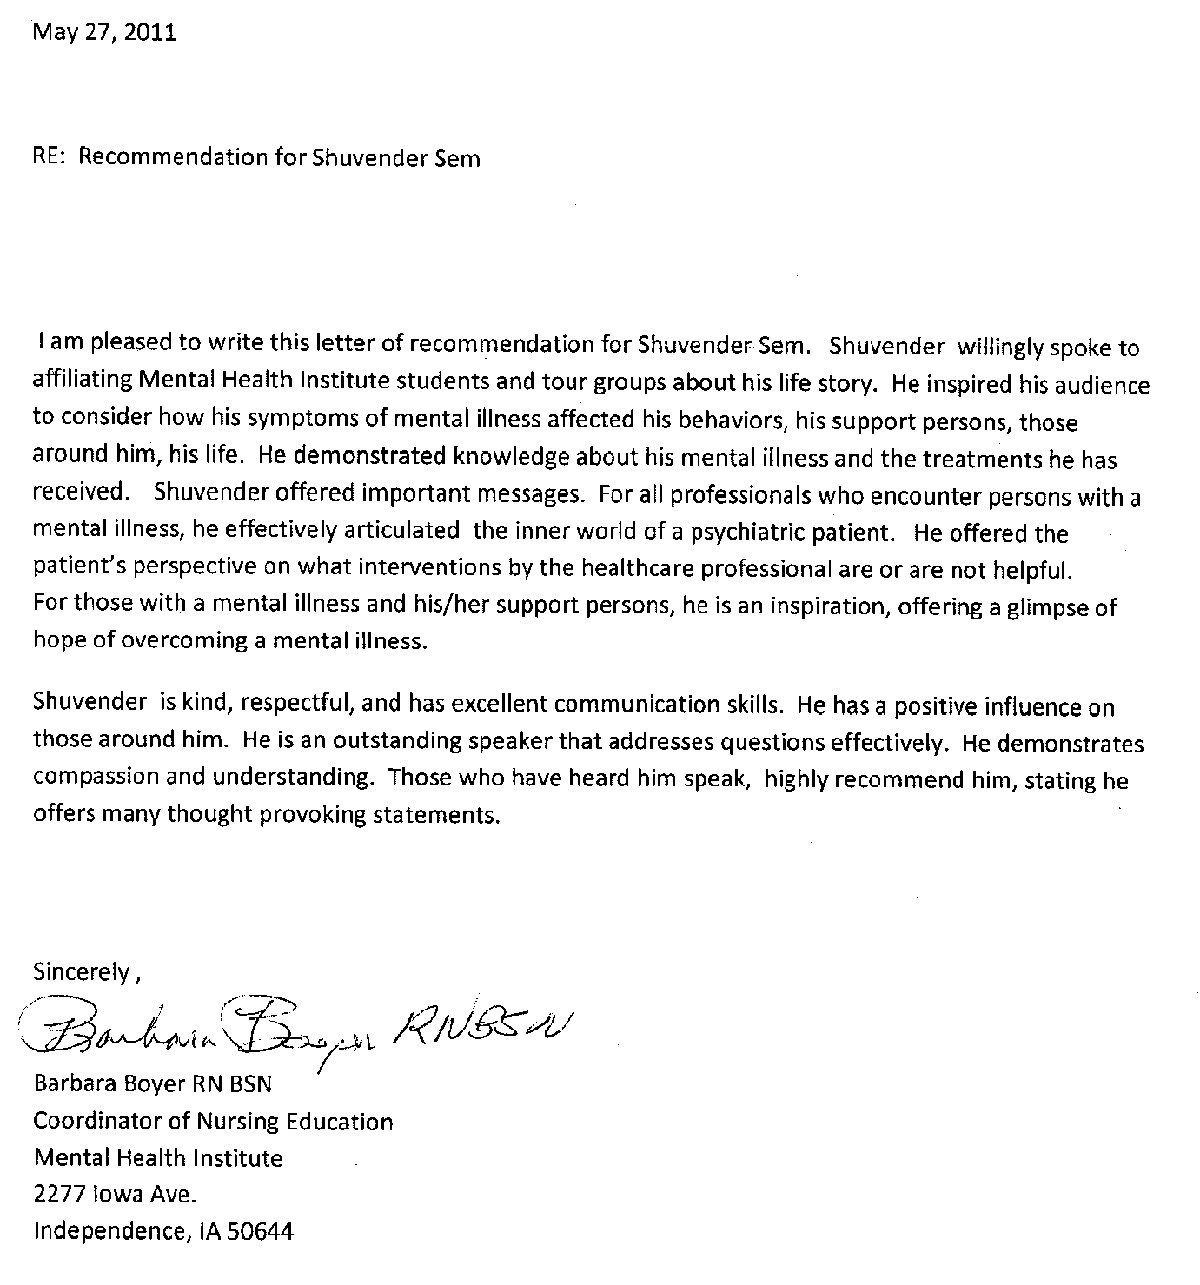 Letter Of Recommendation Template For Nursing Student